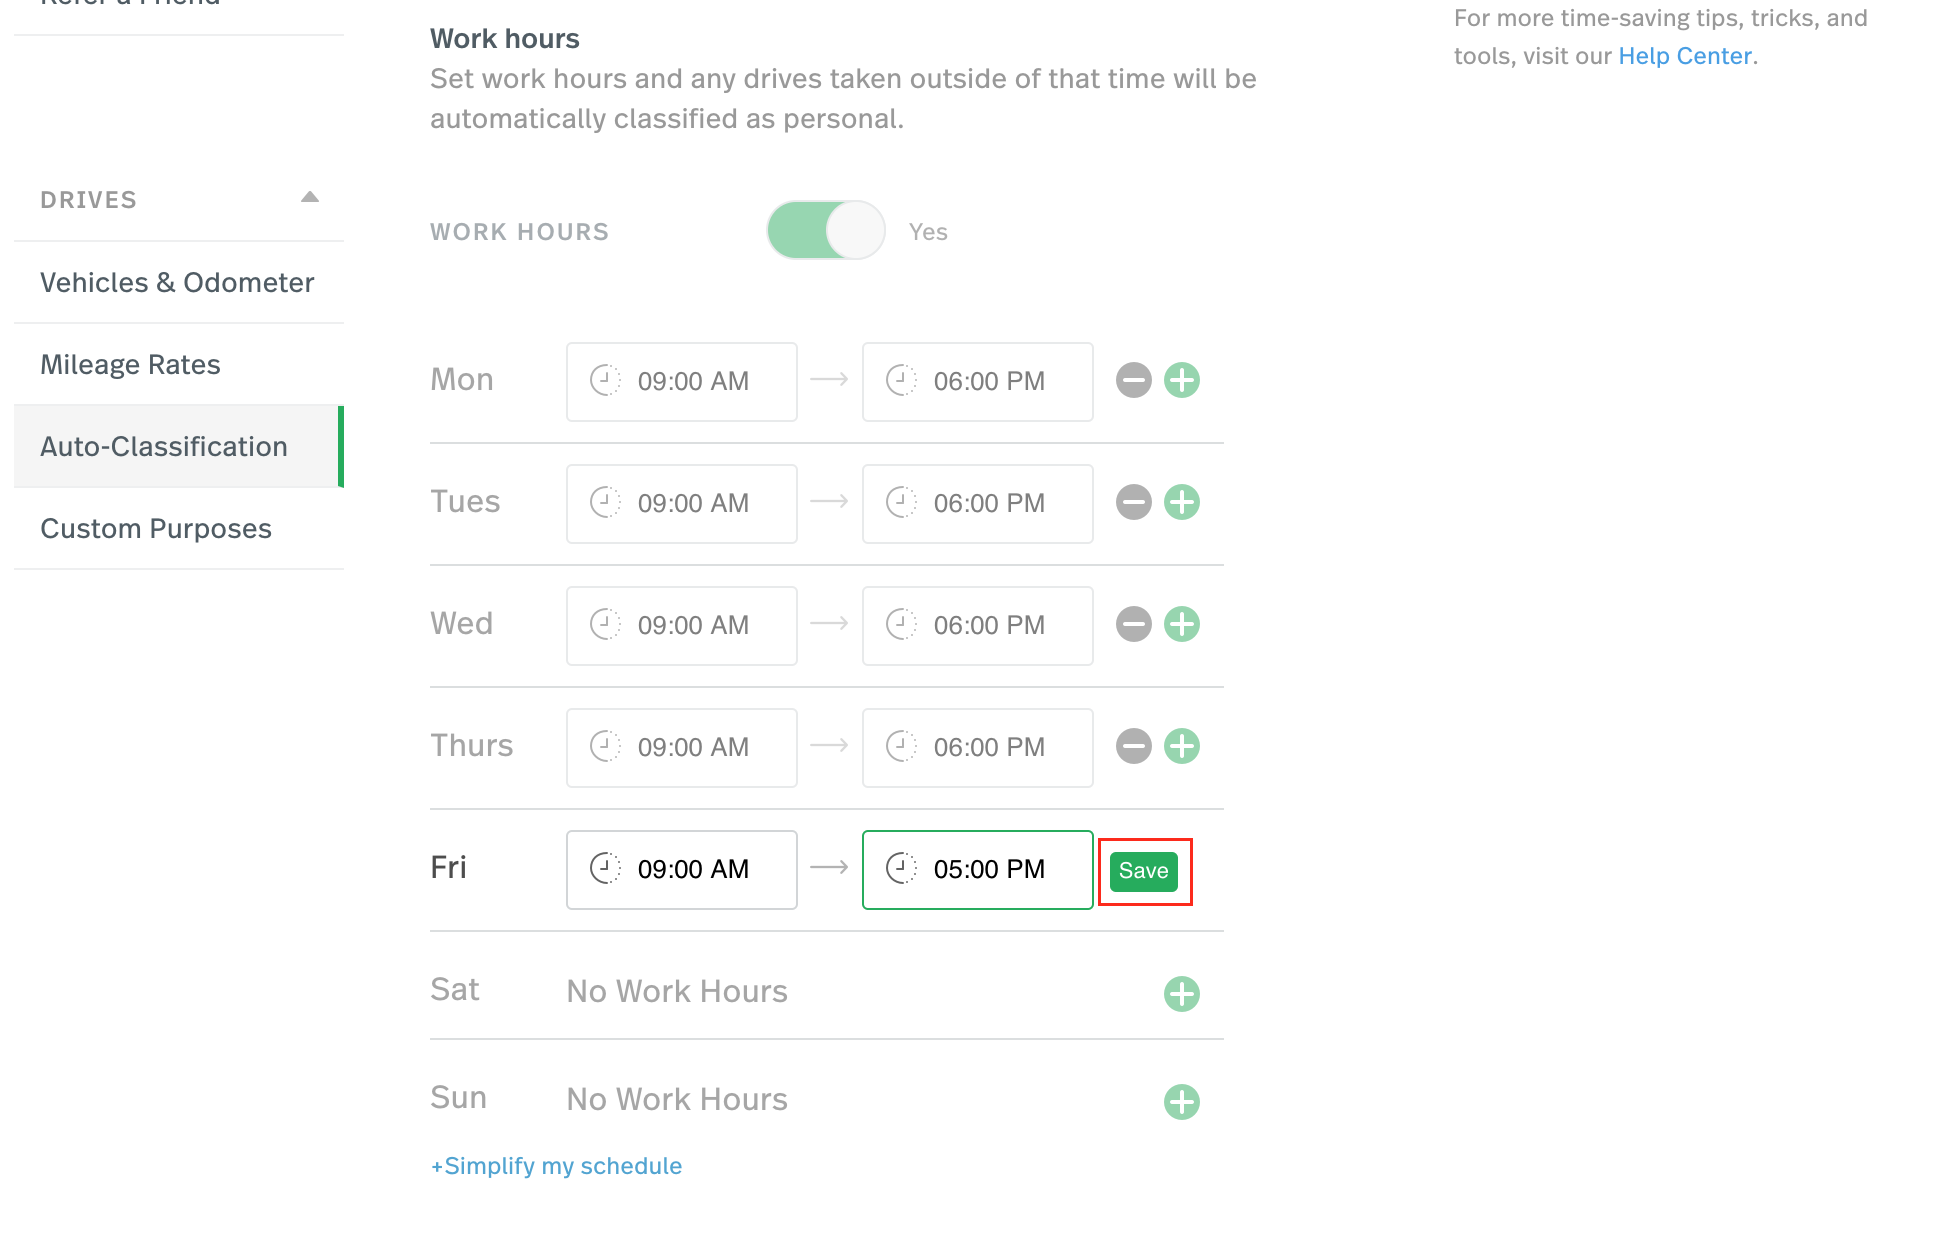 This image highlights the save button in the work hours section.